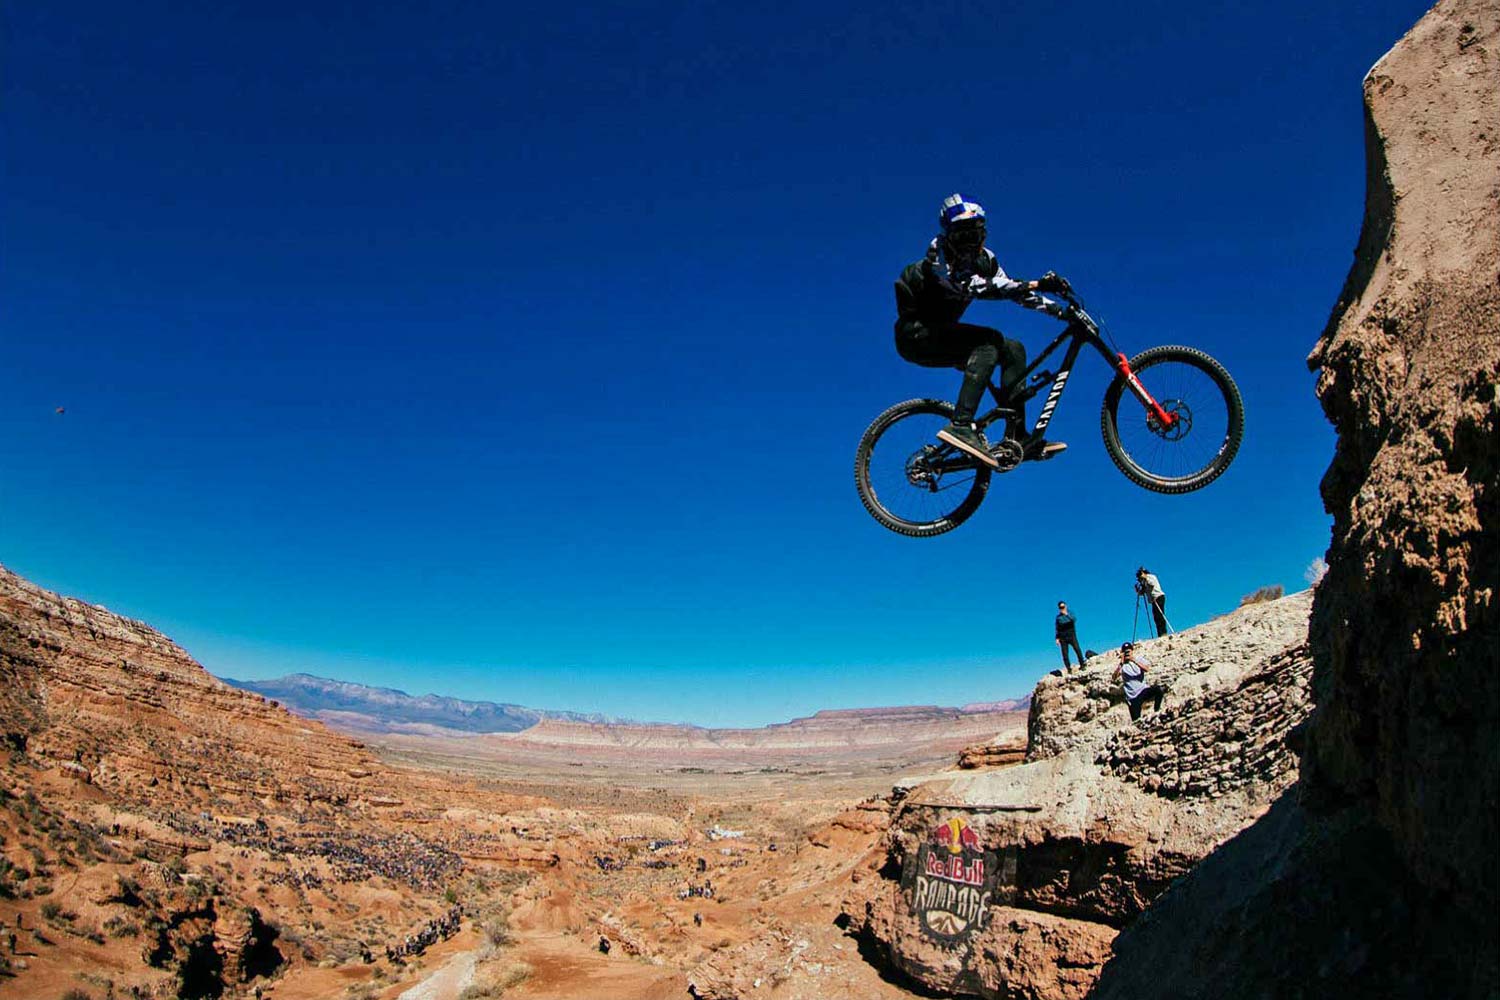 Tommy G at Red Bull Rampage on the new 2022 Canyon Torque freeride mountain bike